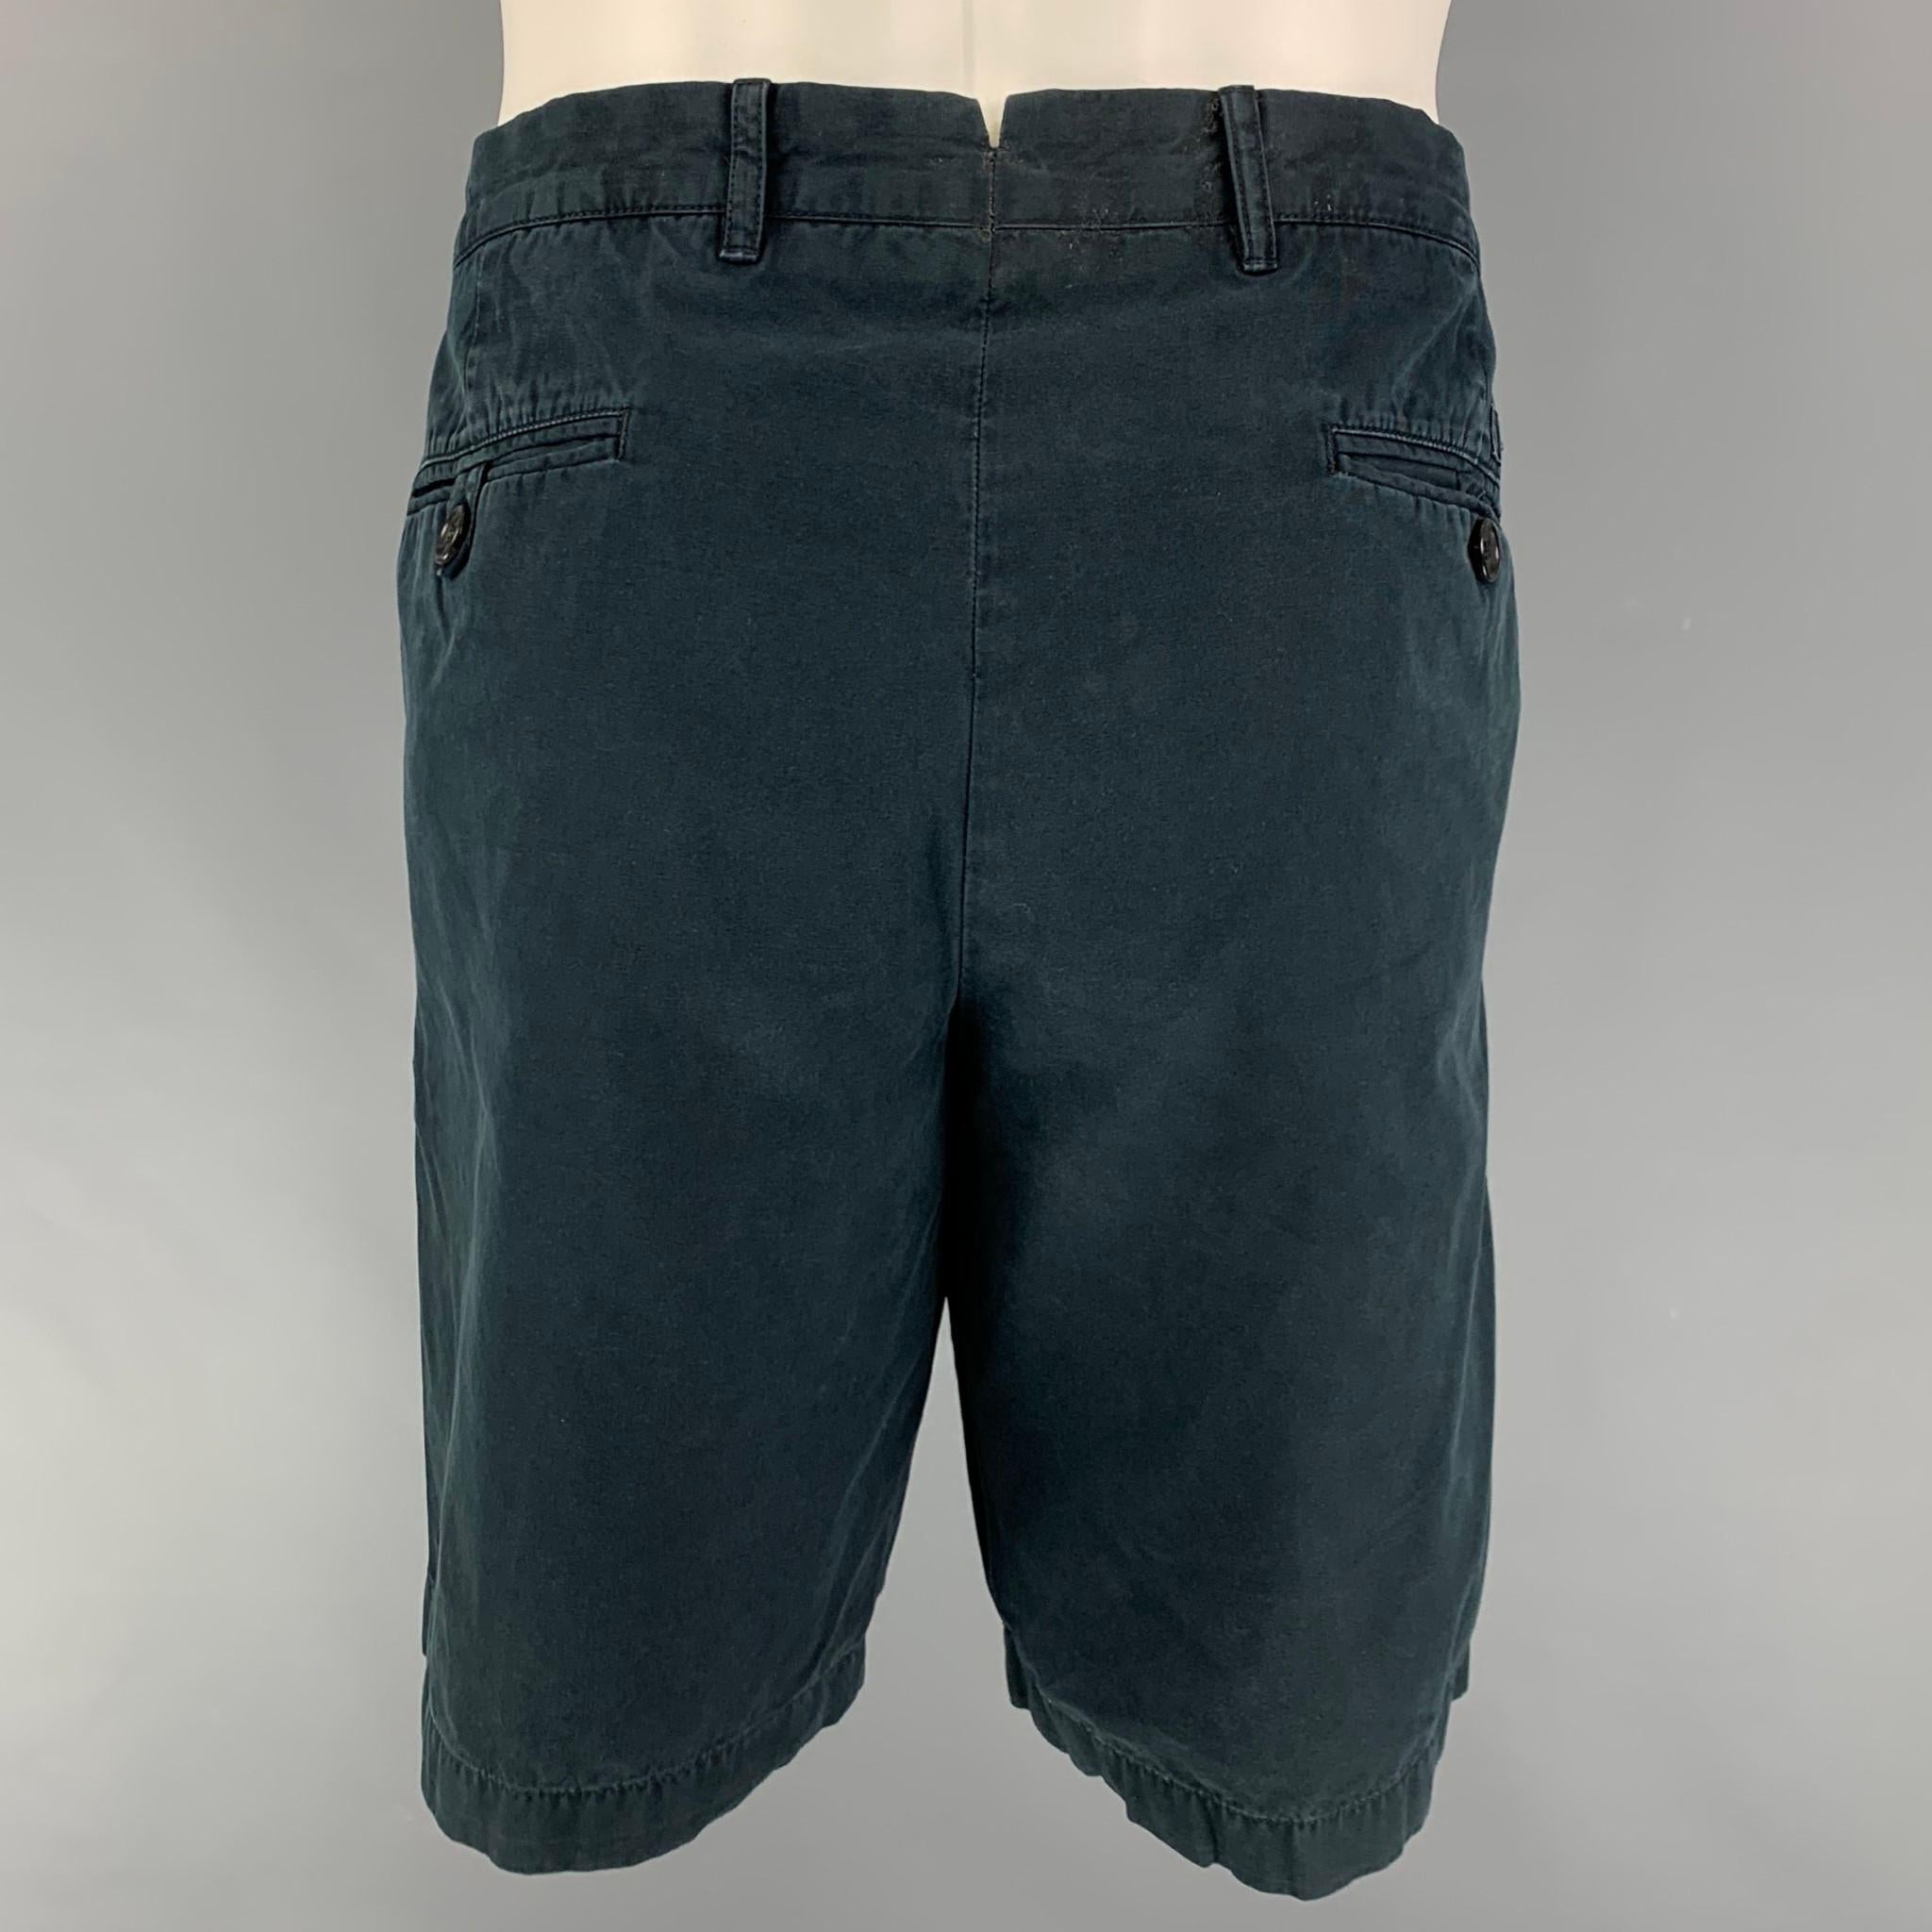 PRADA shorts comes in a navy cotton featuring a zip fly closure. 

Good Pre-Owned Condition. Missing zipper detail. As-Is.
Marked: 54

Measurements:

Waist: 36 in.
Rise: 9.5 in.
Inseam: 10 in. 